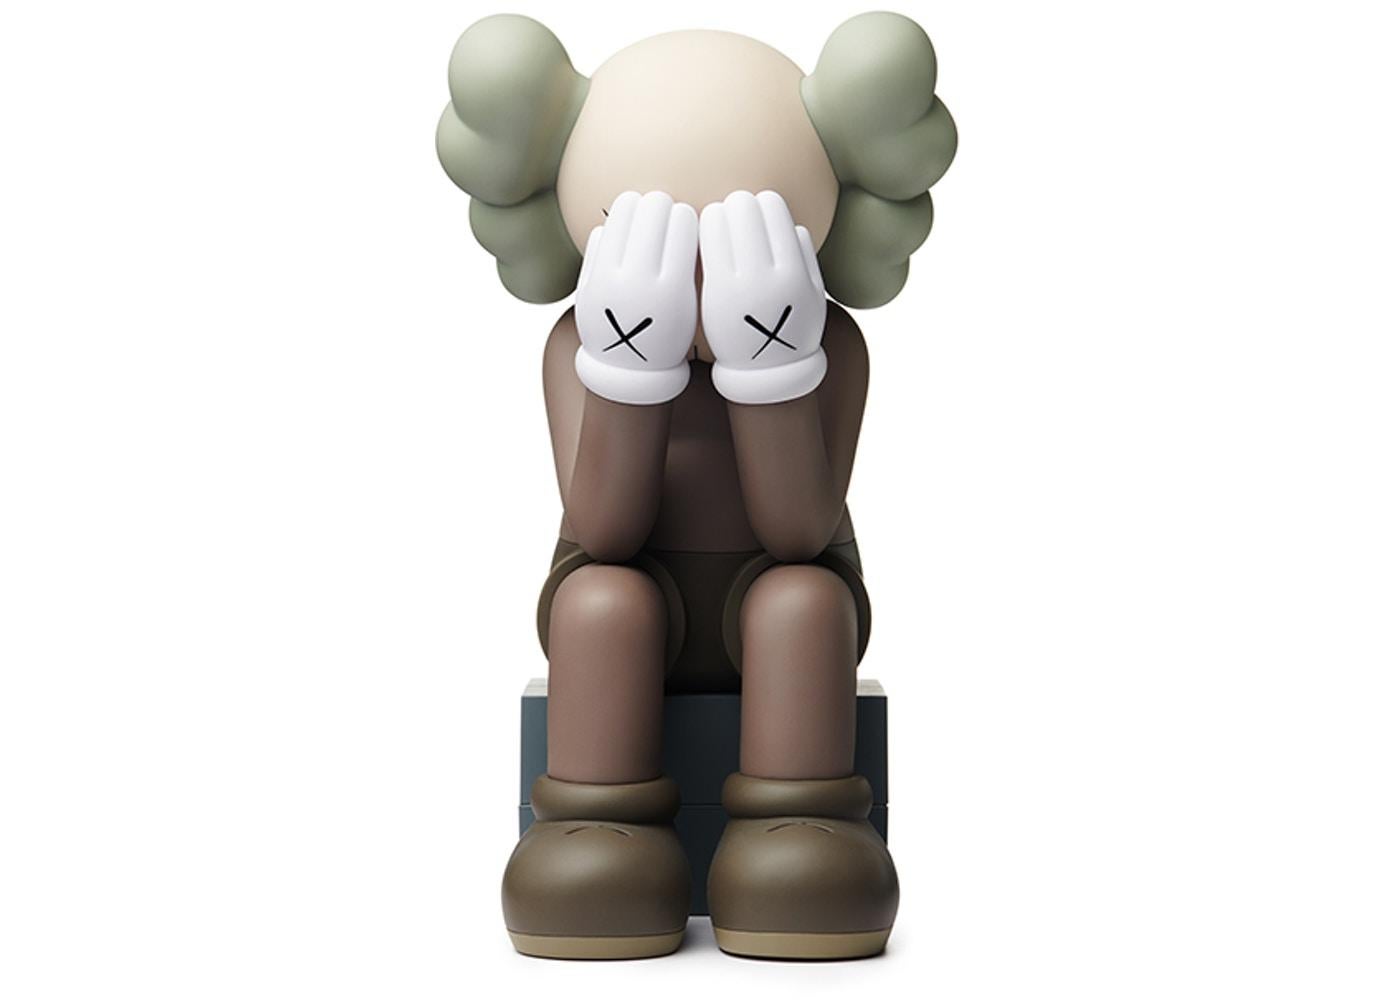 Passing Through (Brown)
Date of creation: 2018
Medium: Sculpture
Media: Vinyl
Edition: Unknown and sold out
Size: 20 x 8.6 x 13 cm.
Observations: Vinyl sculpture published in 2018 by KAWS/ORIGINALFAKE & Medicom Toys. Sent inside its original box.